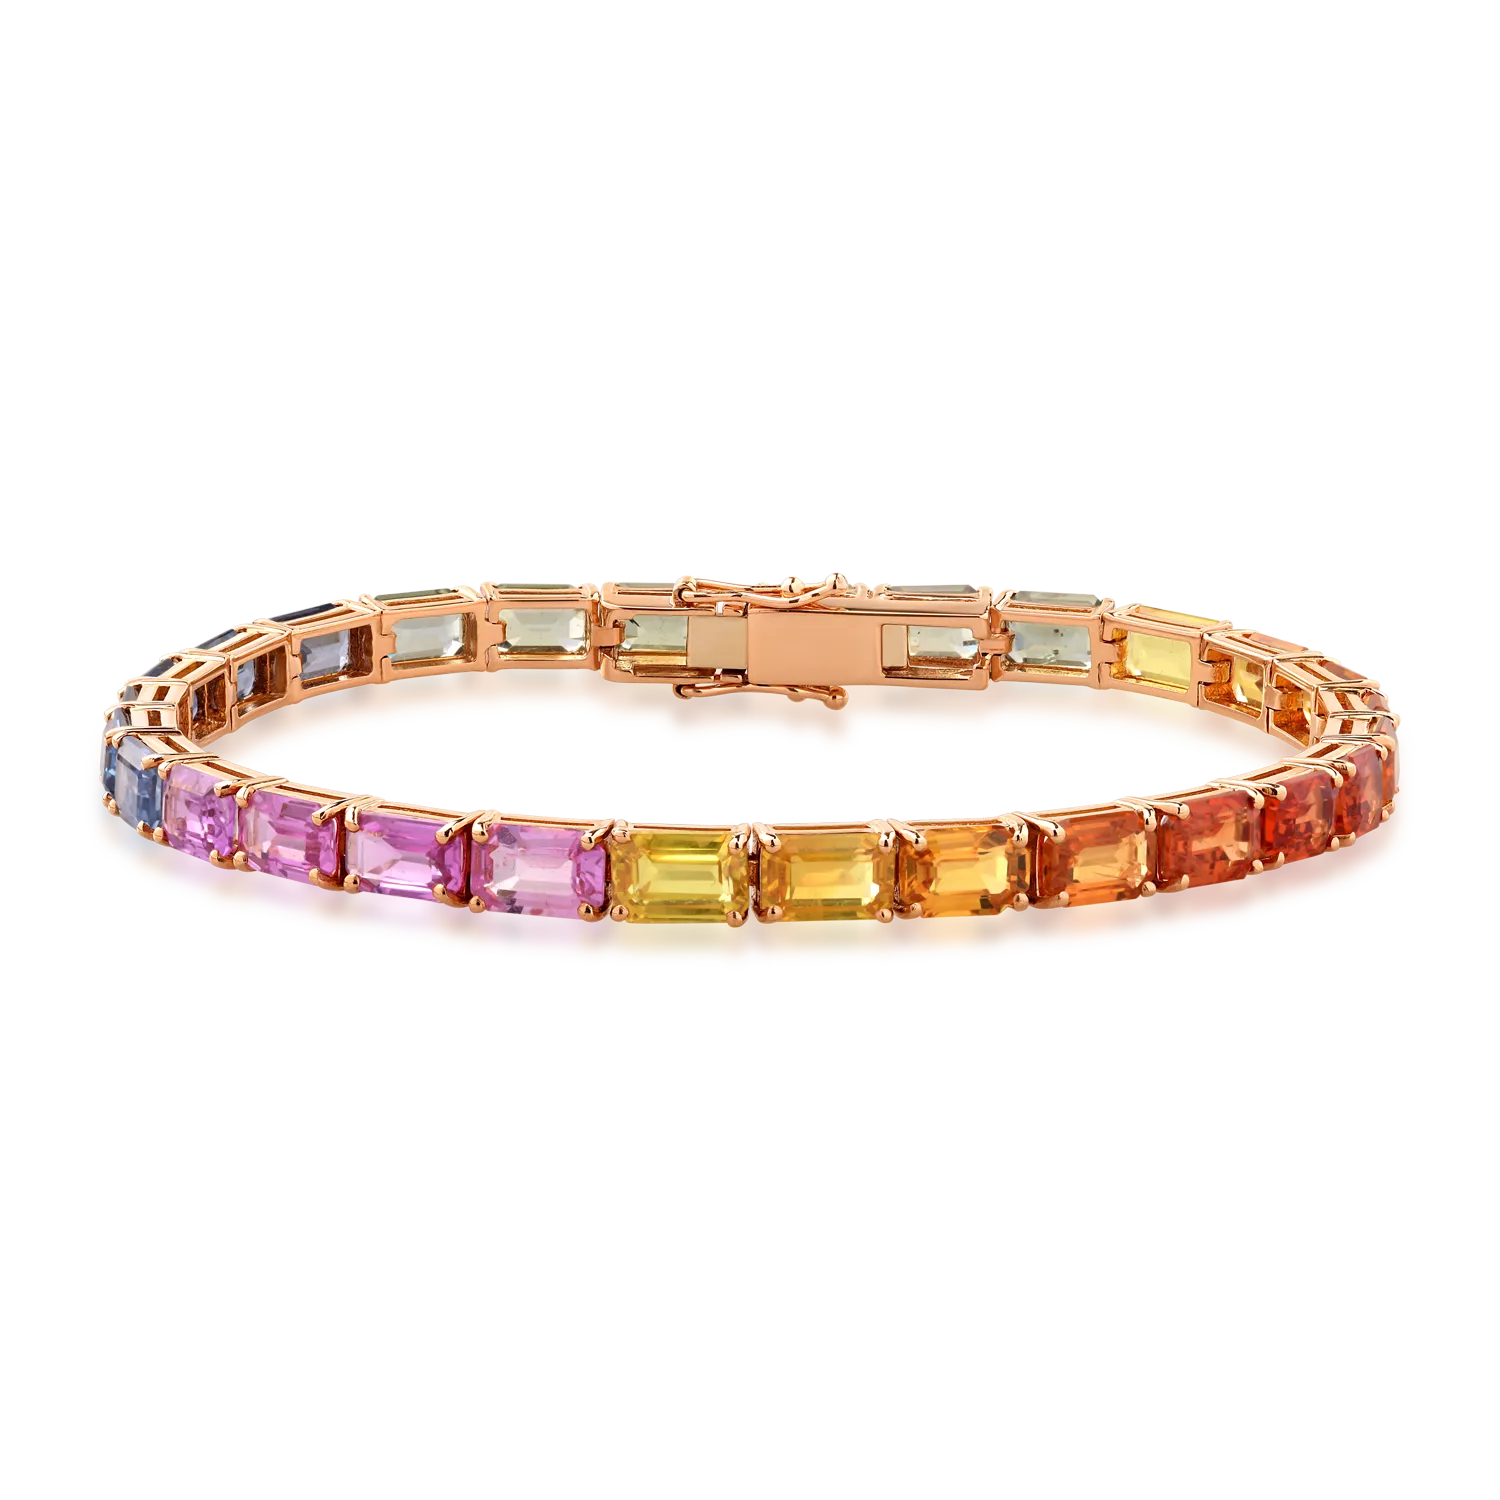 18K rose gold tennis bracelet with 18.85ct multicolored sapphires